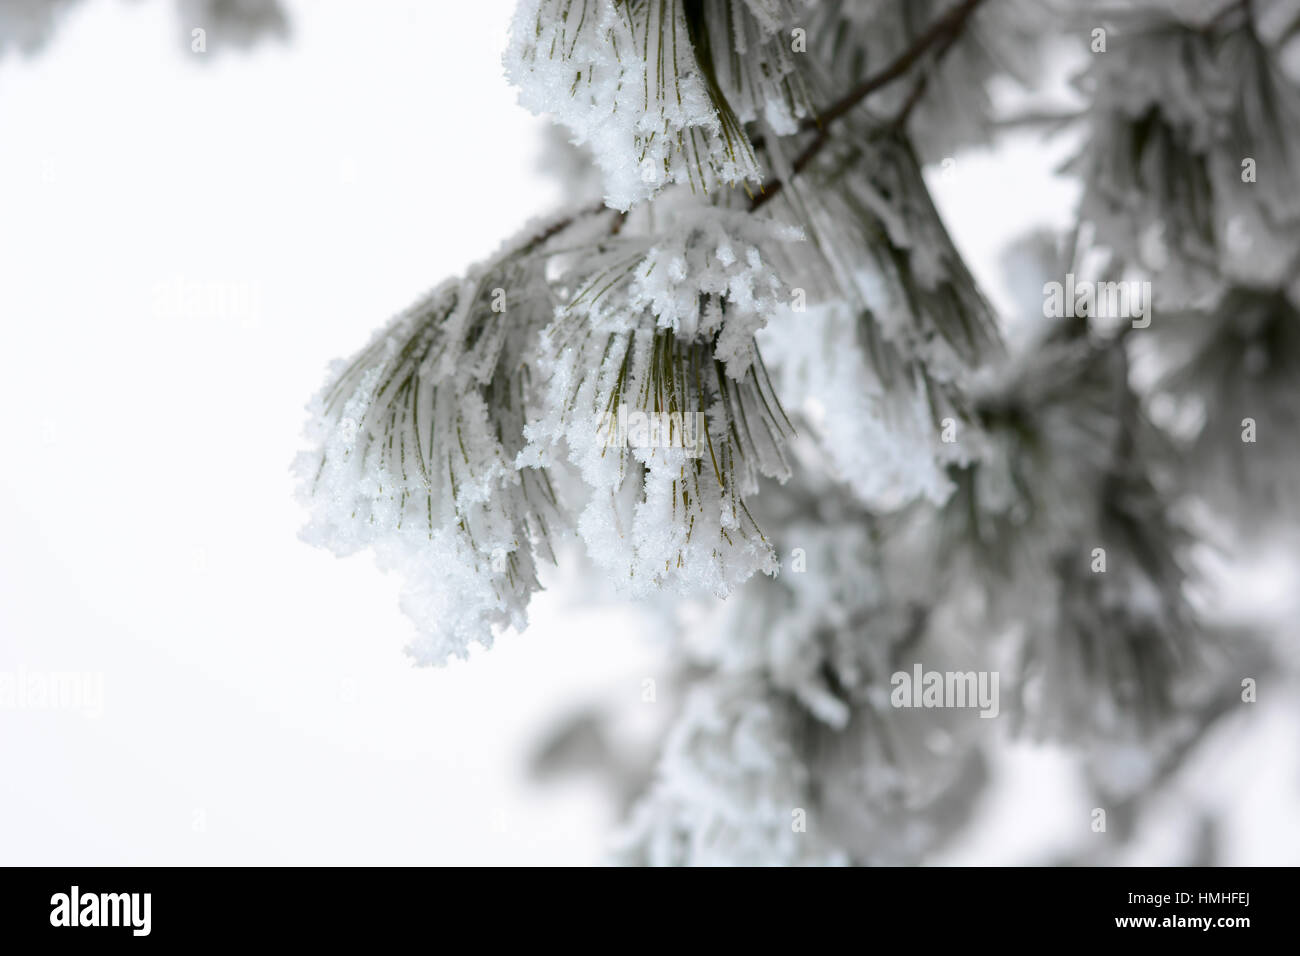 Snow Covered Pine Tree Branches Close Up Branches of pine tree with snow Stock Photo